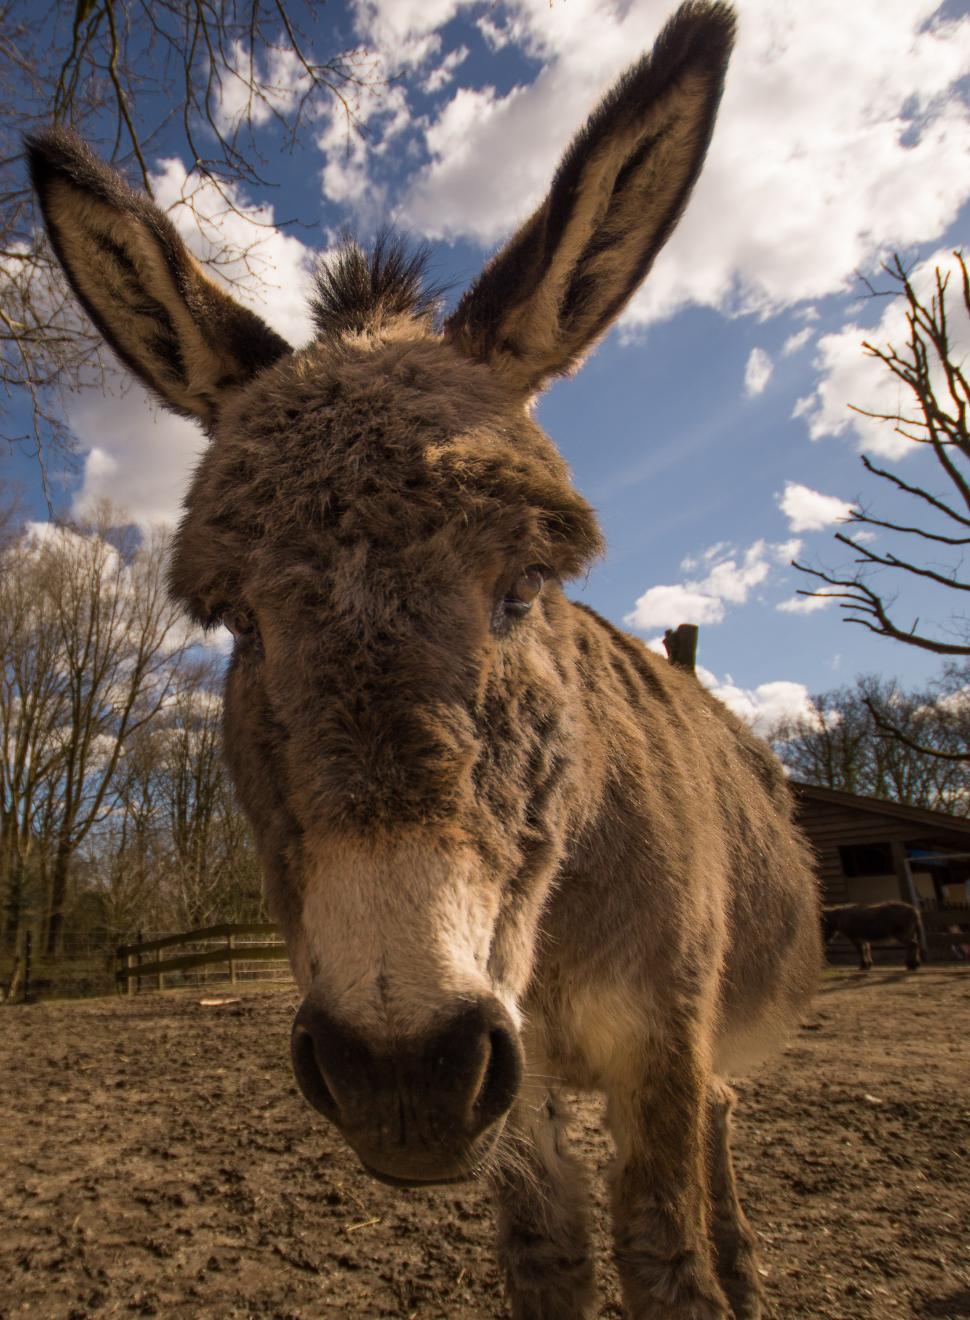 Free Image of Donkey Standing in Dirt Field Under Cloudy Blue Sky 